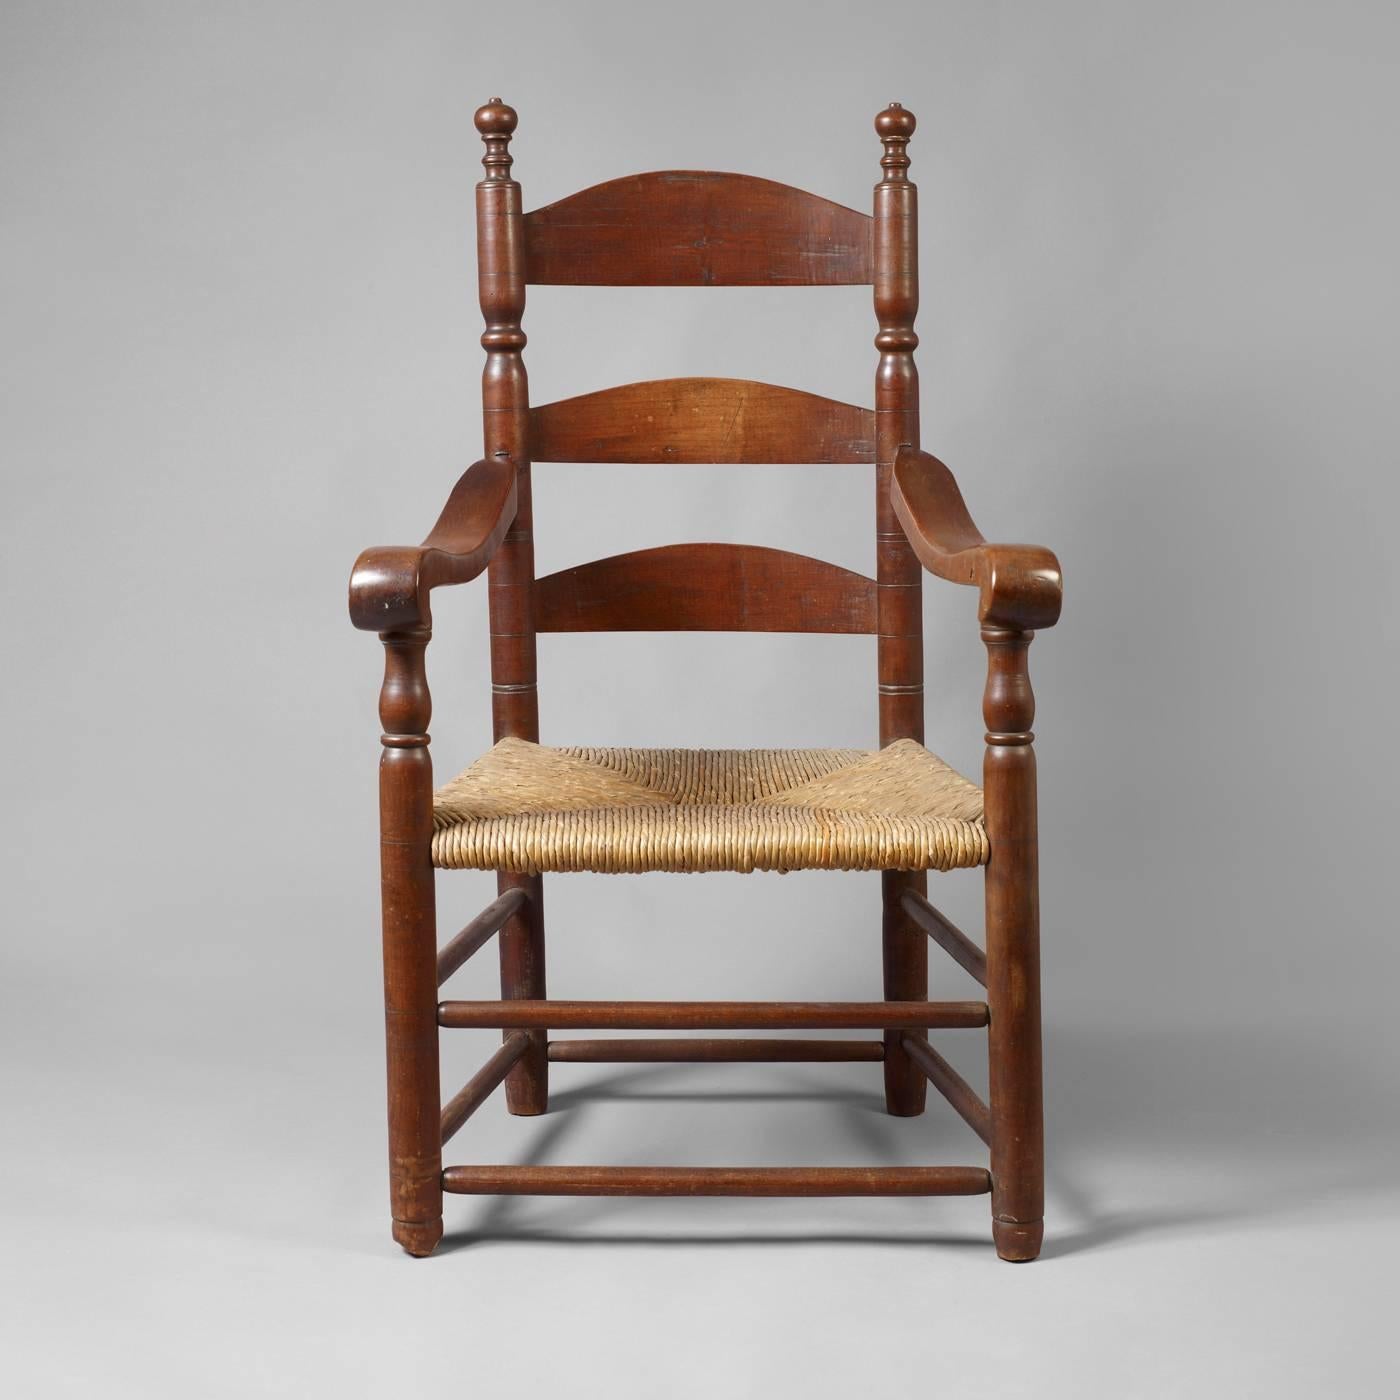 Probably New York, ca. 1720-1750.
Maple, Ash, rush seat
Excellent condition, full height, wonderful patina.
The rush seat is at least 100 years old and the finish is at least 150 years old.